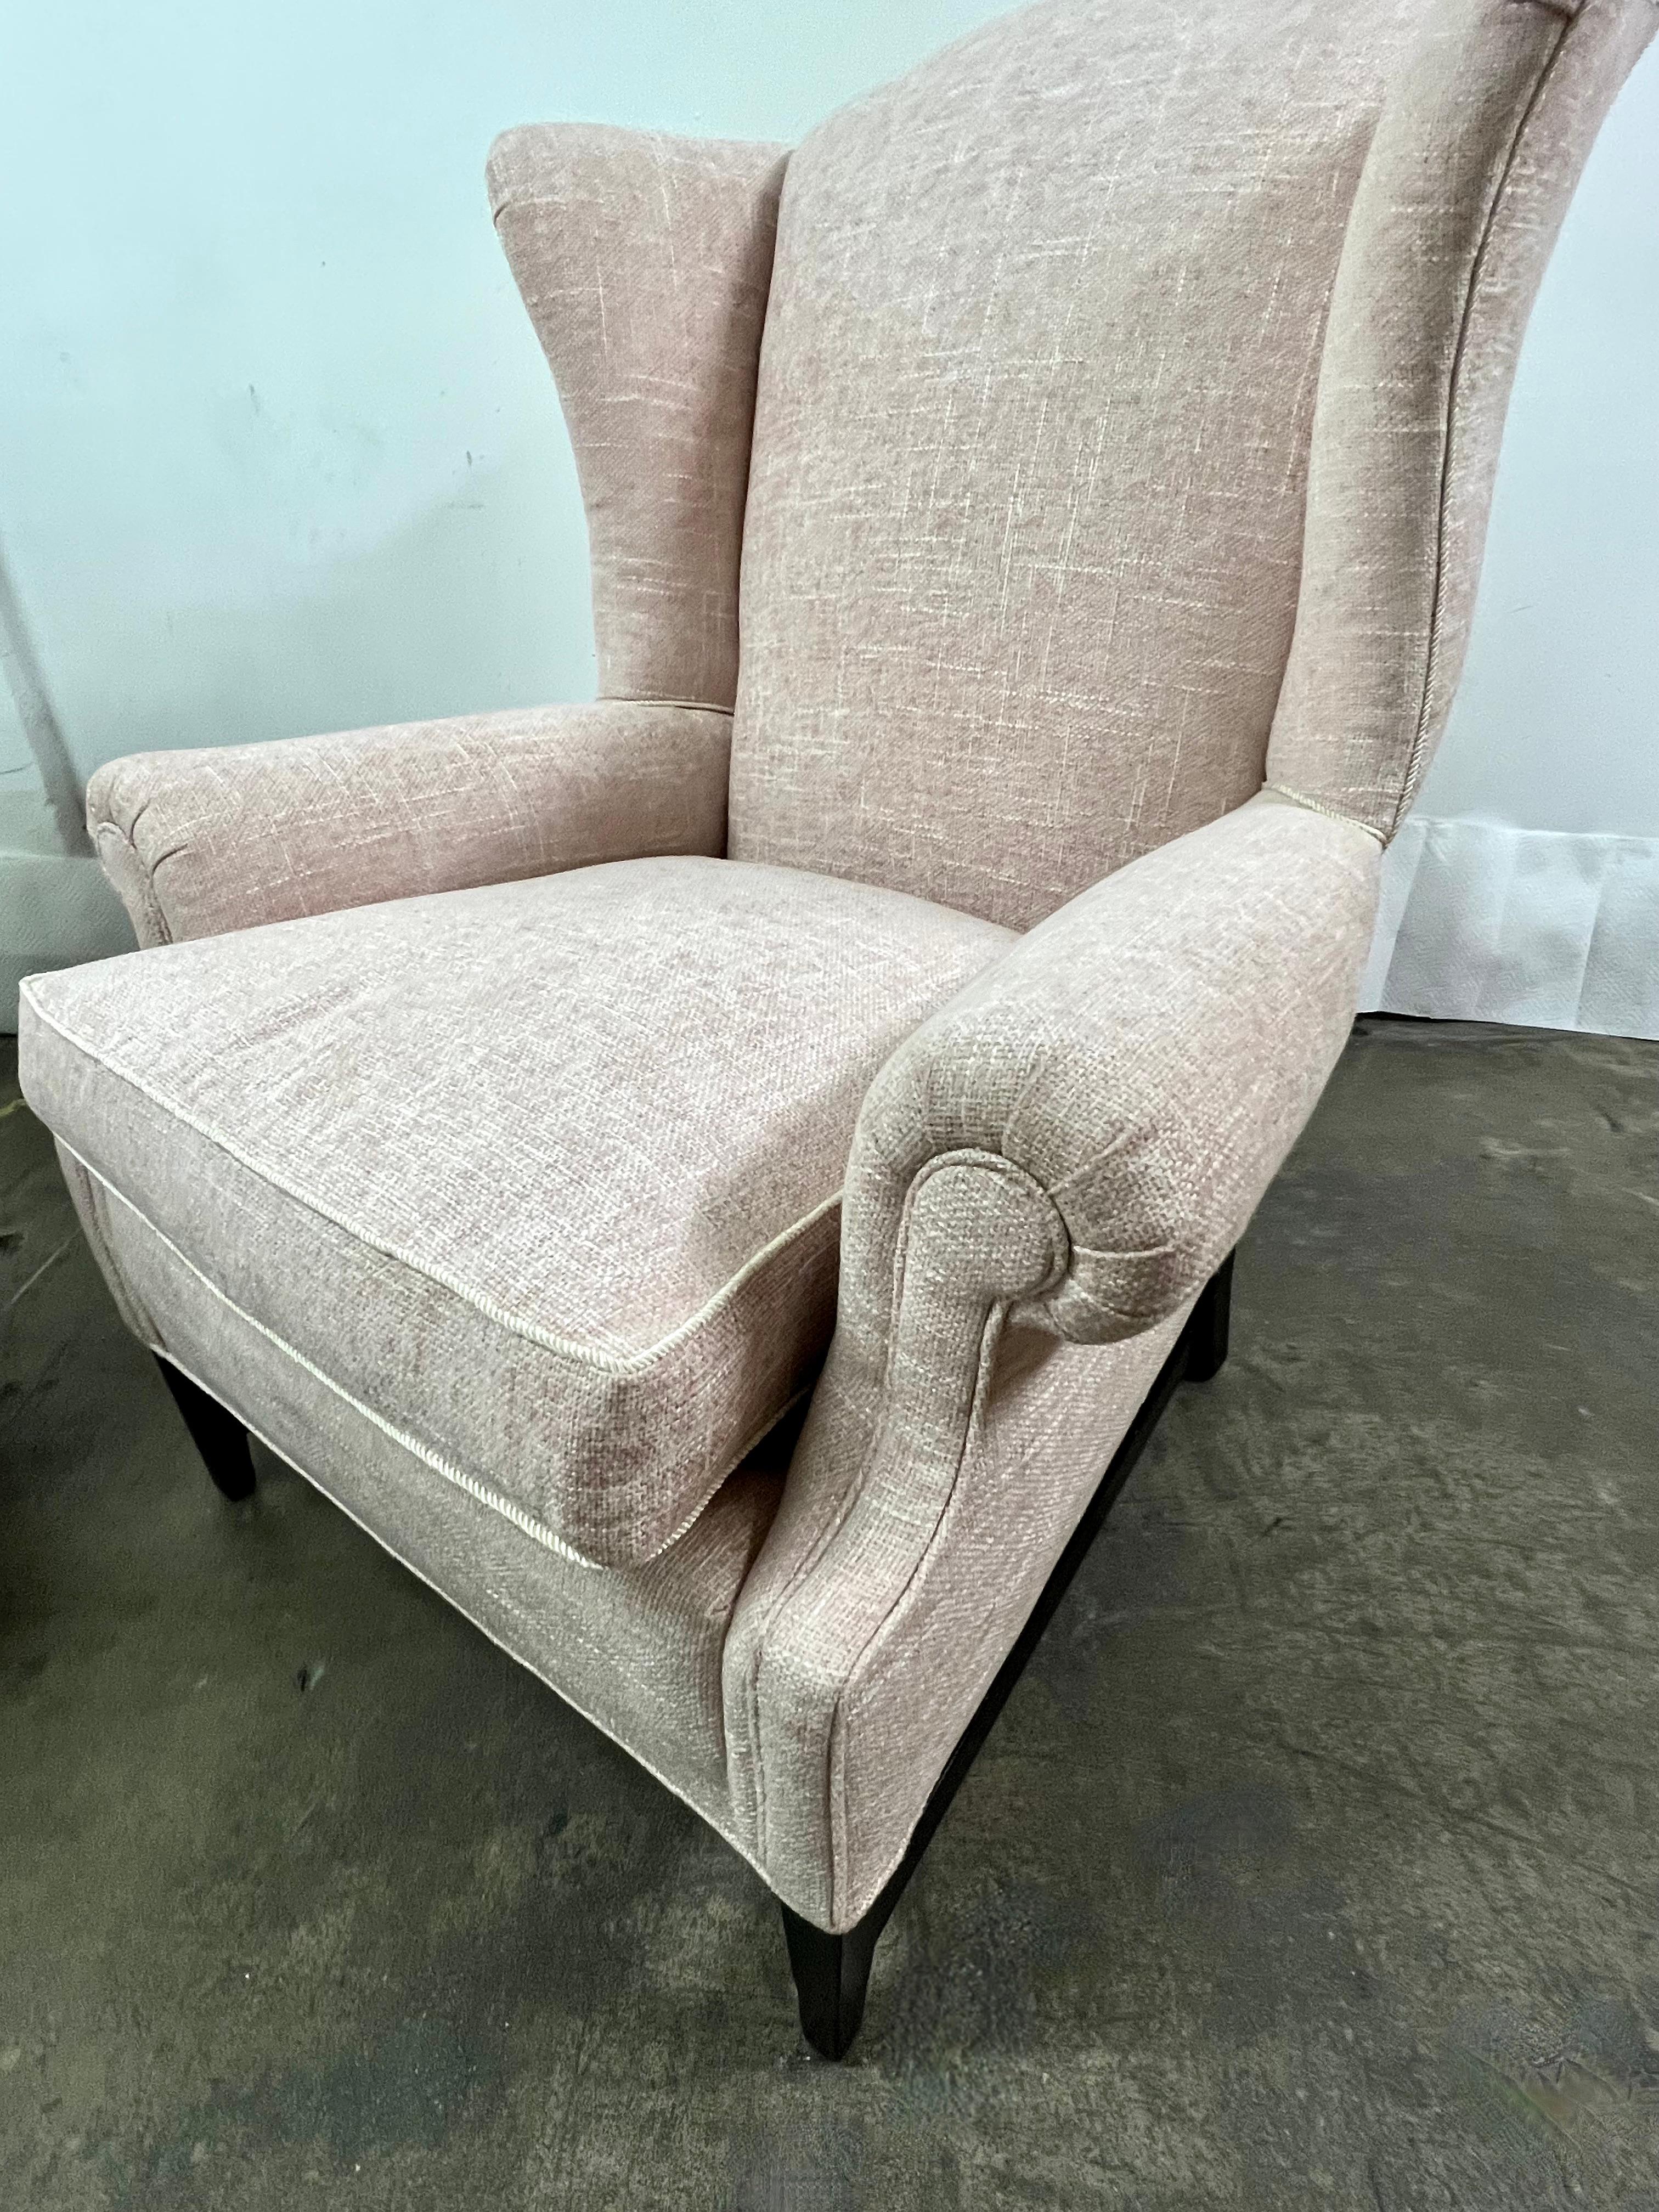 Pair of Georgian Style Wingback Chairs Upholstered in Linen For Sale 2